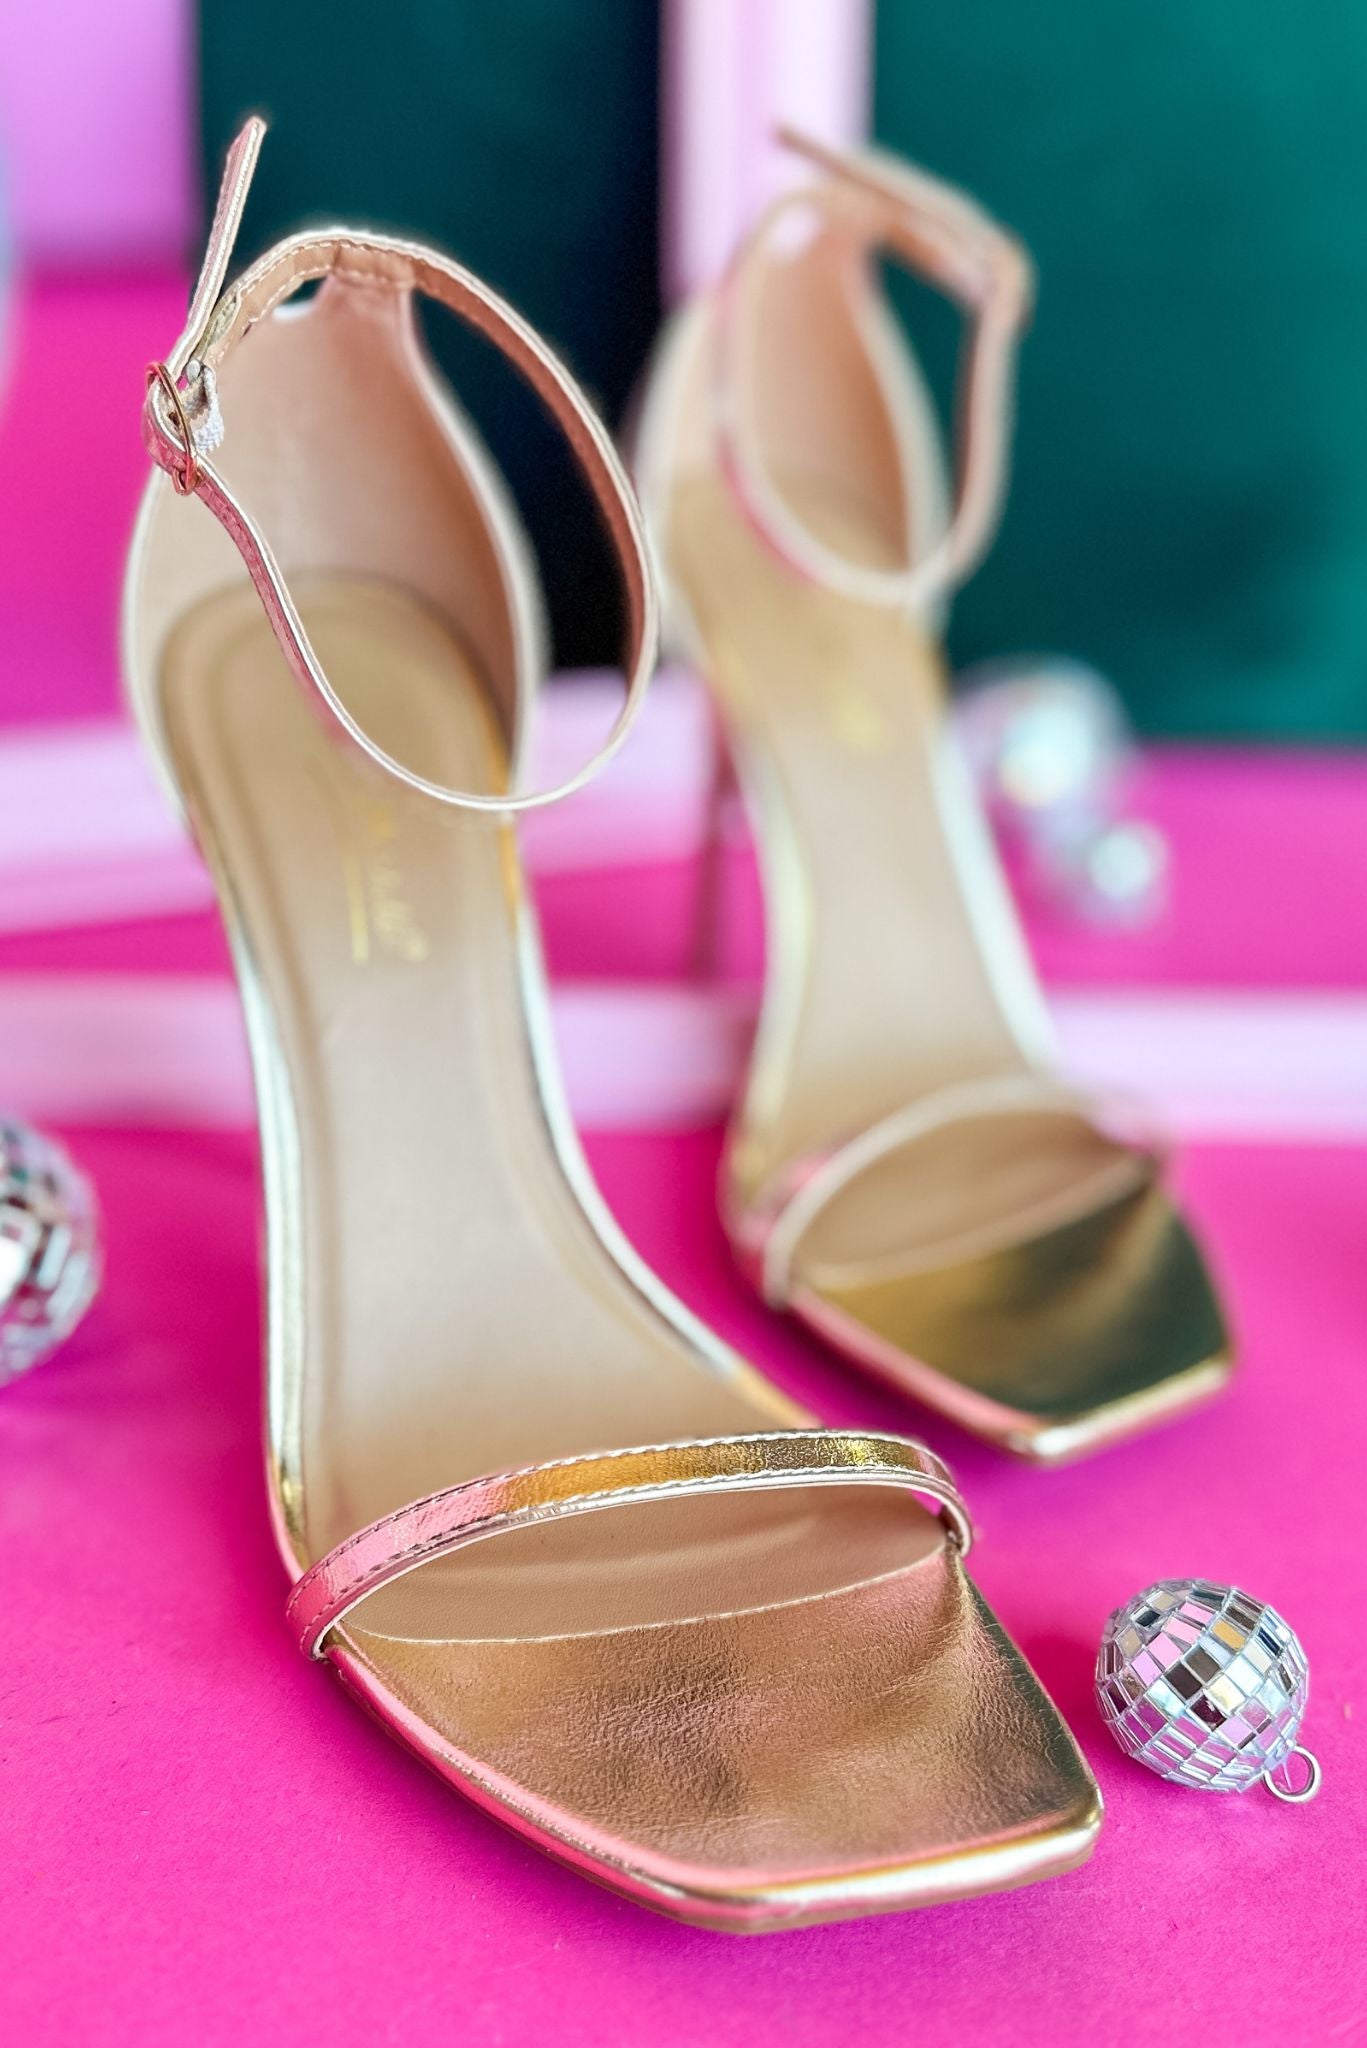 Load image into Gallery viewer, Gold Metallic One Band Ankle Strap Heels, strap detail, ankle strap, event heel, glam, trendy, shop style your senses by mallory fitzsimmons
